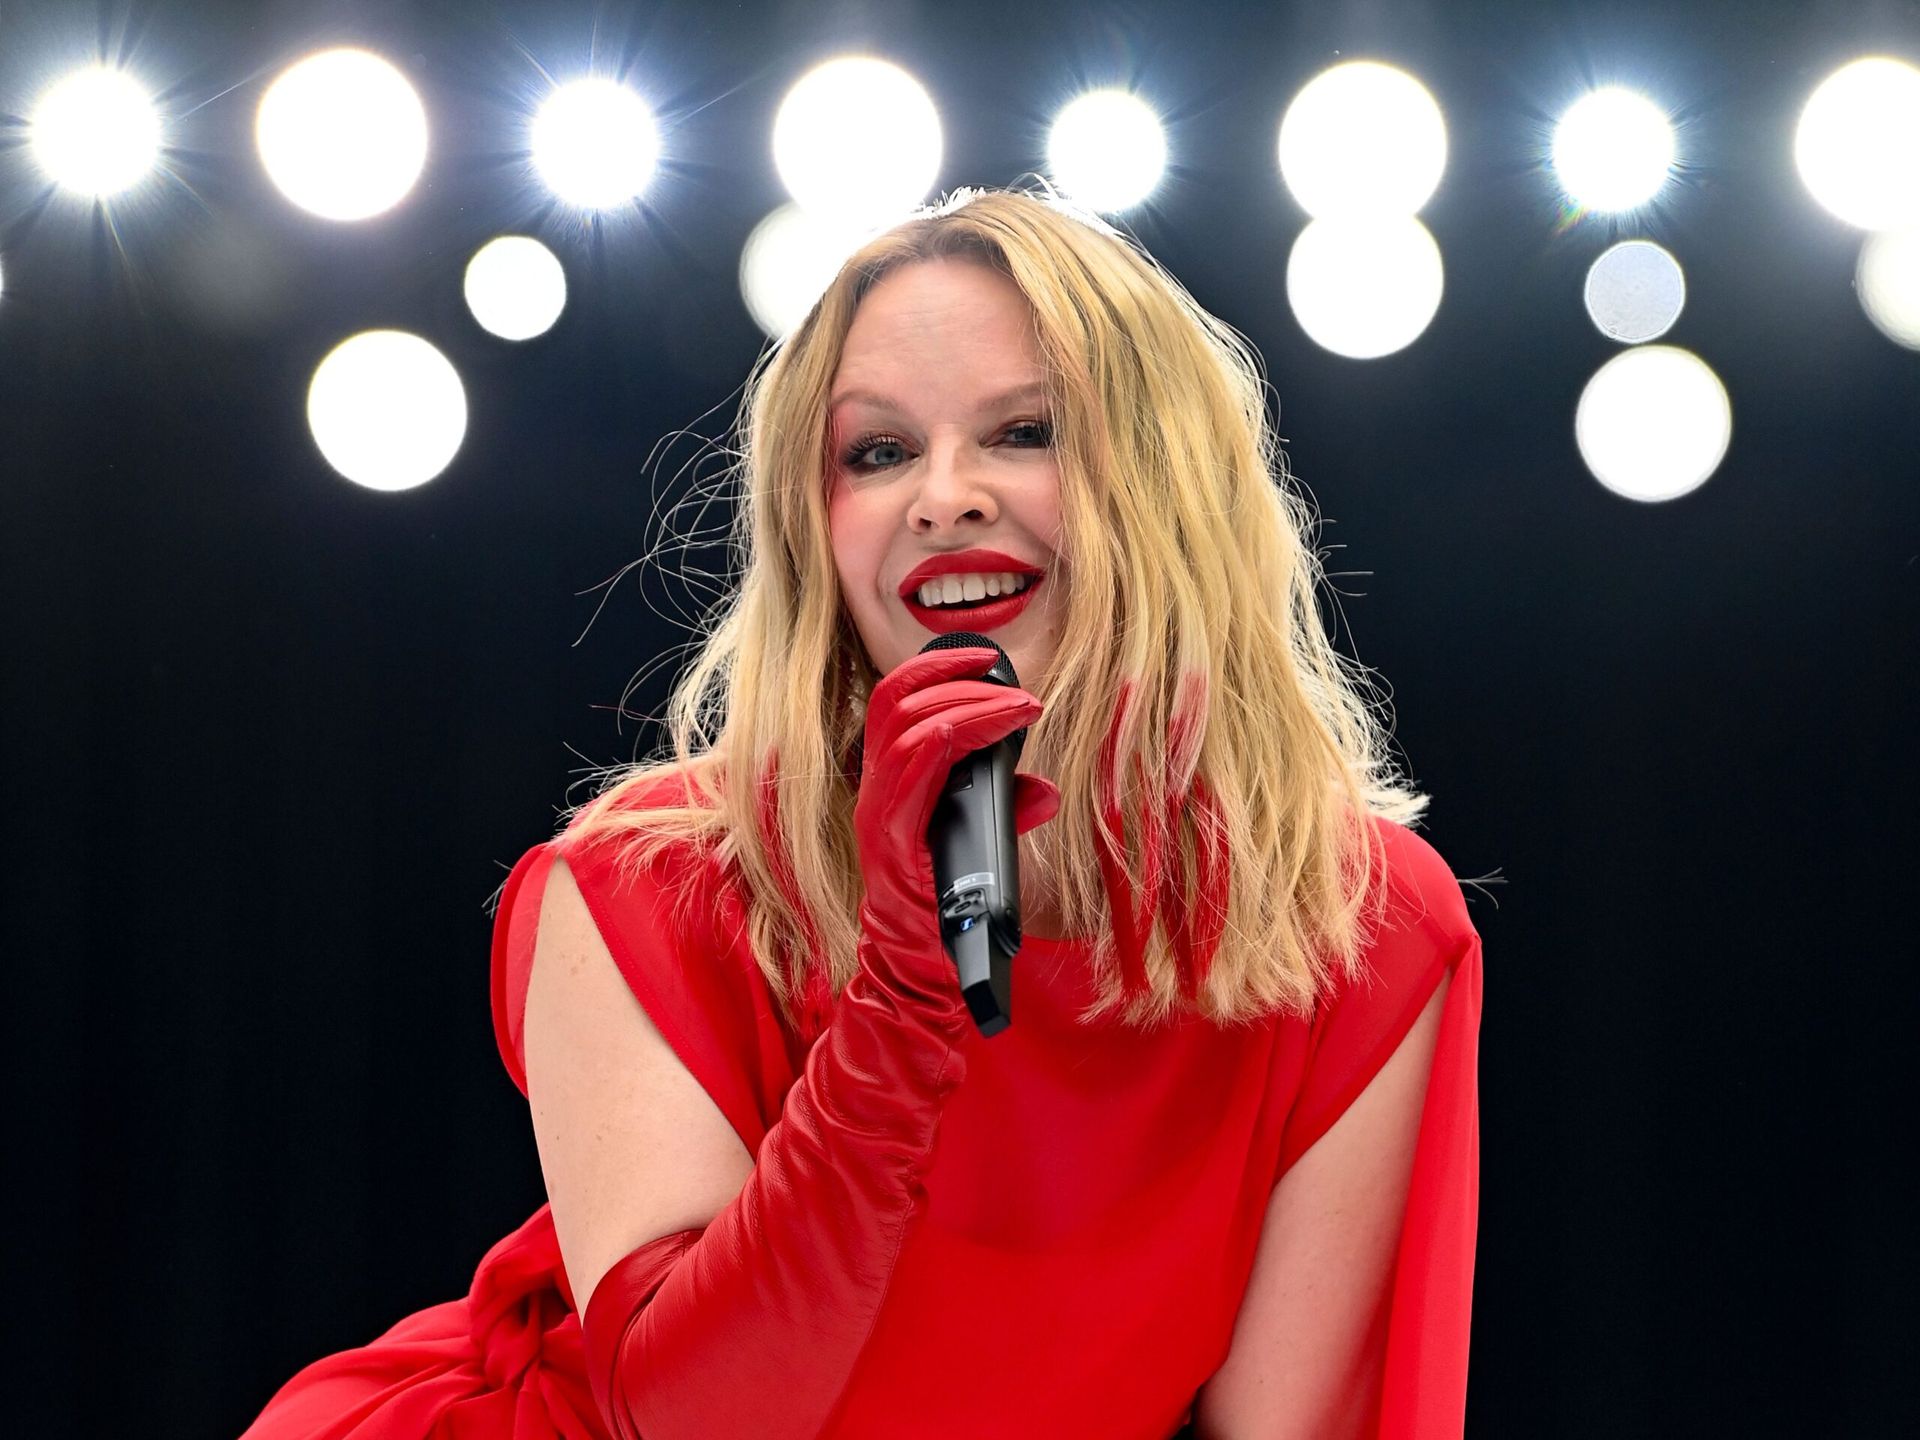 Kylie Minogue to launch Las Vegas residency show in November 